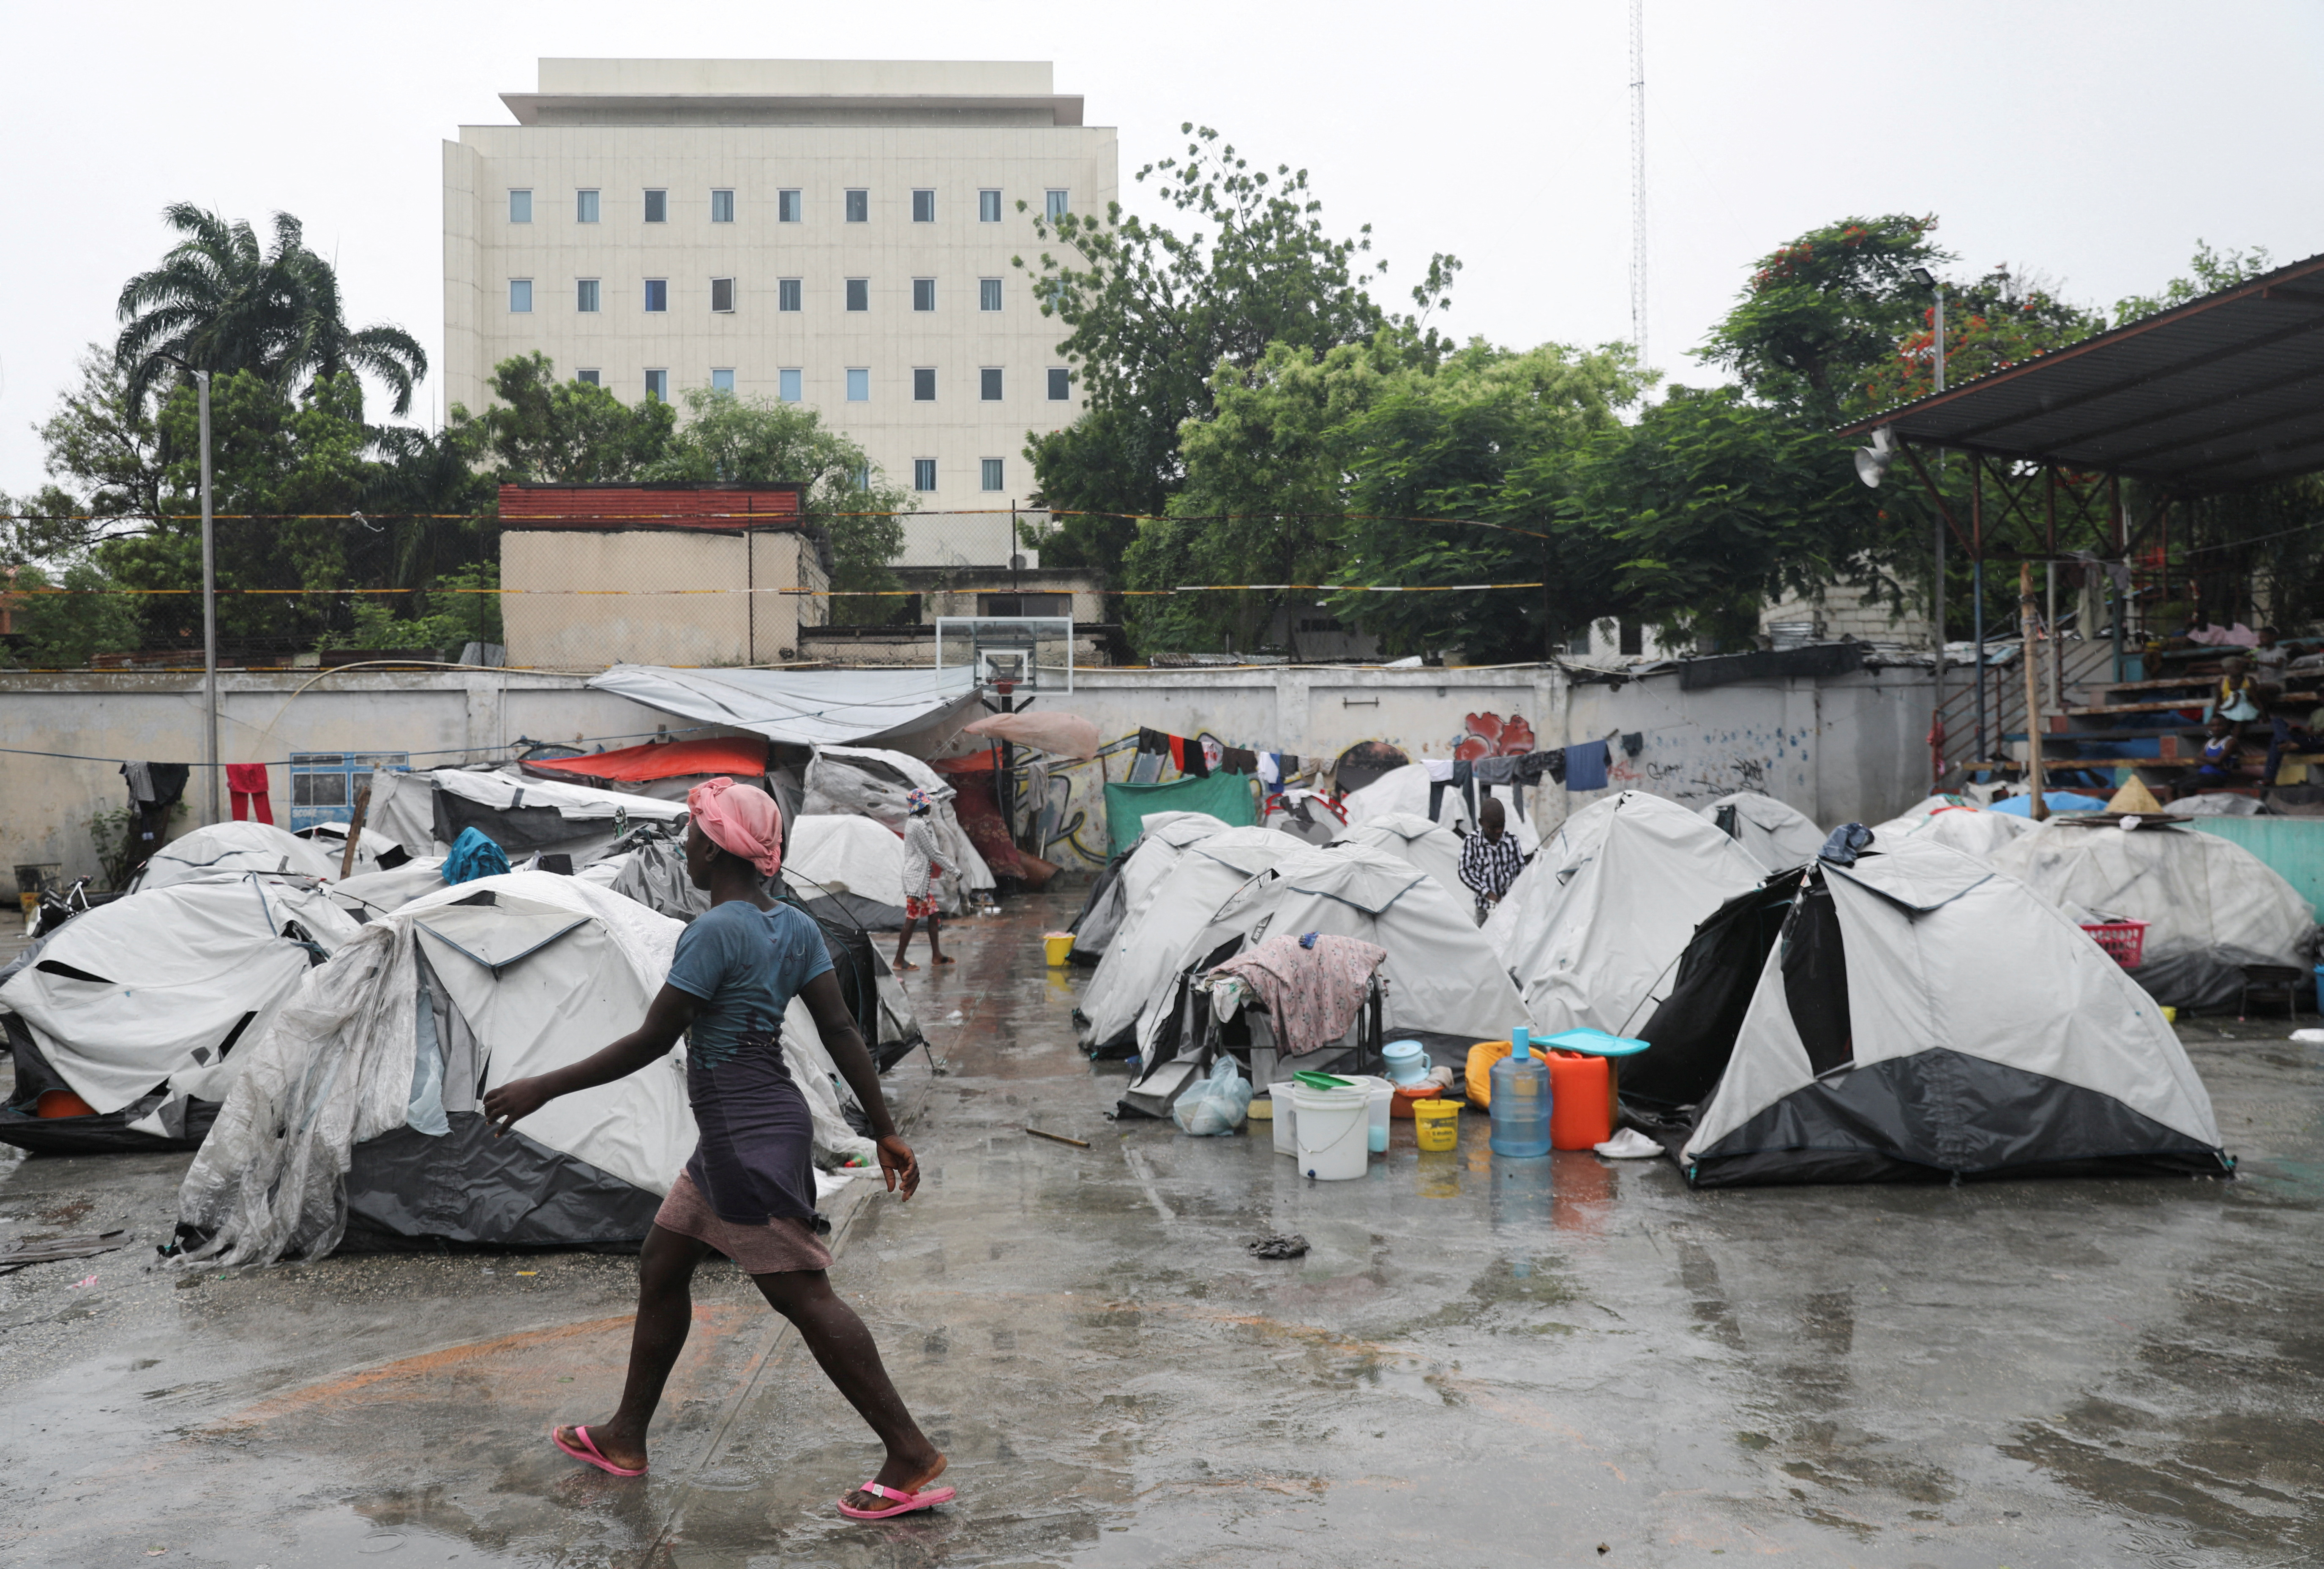 People displaced by gang violence shelter at a school, in Port-au-Prince